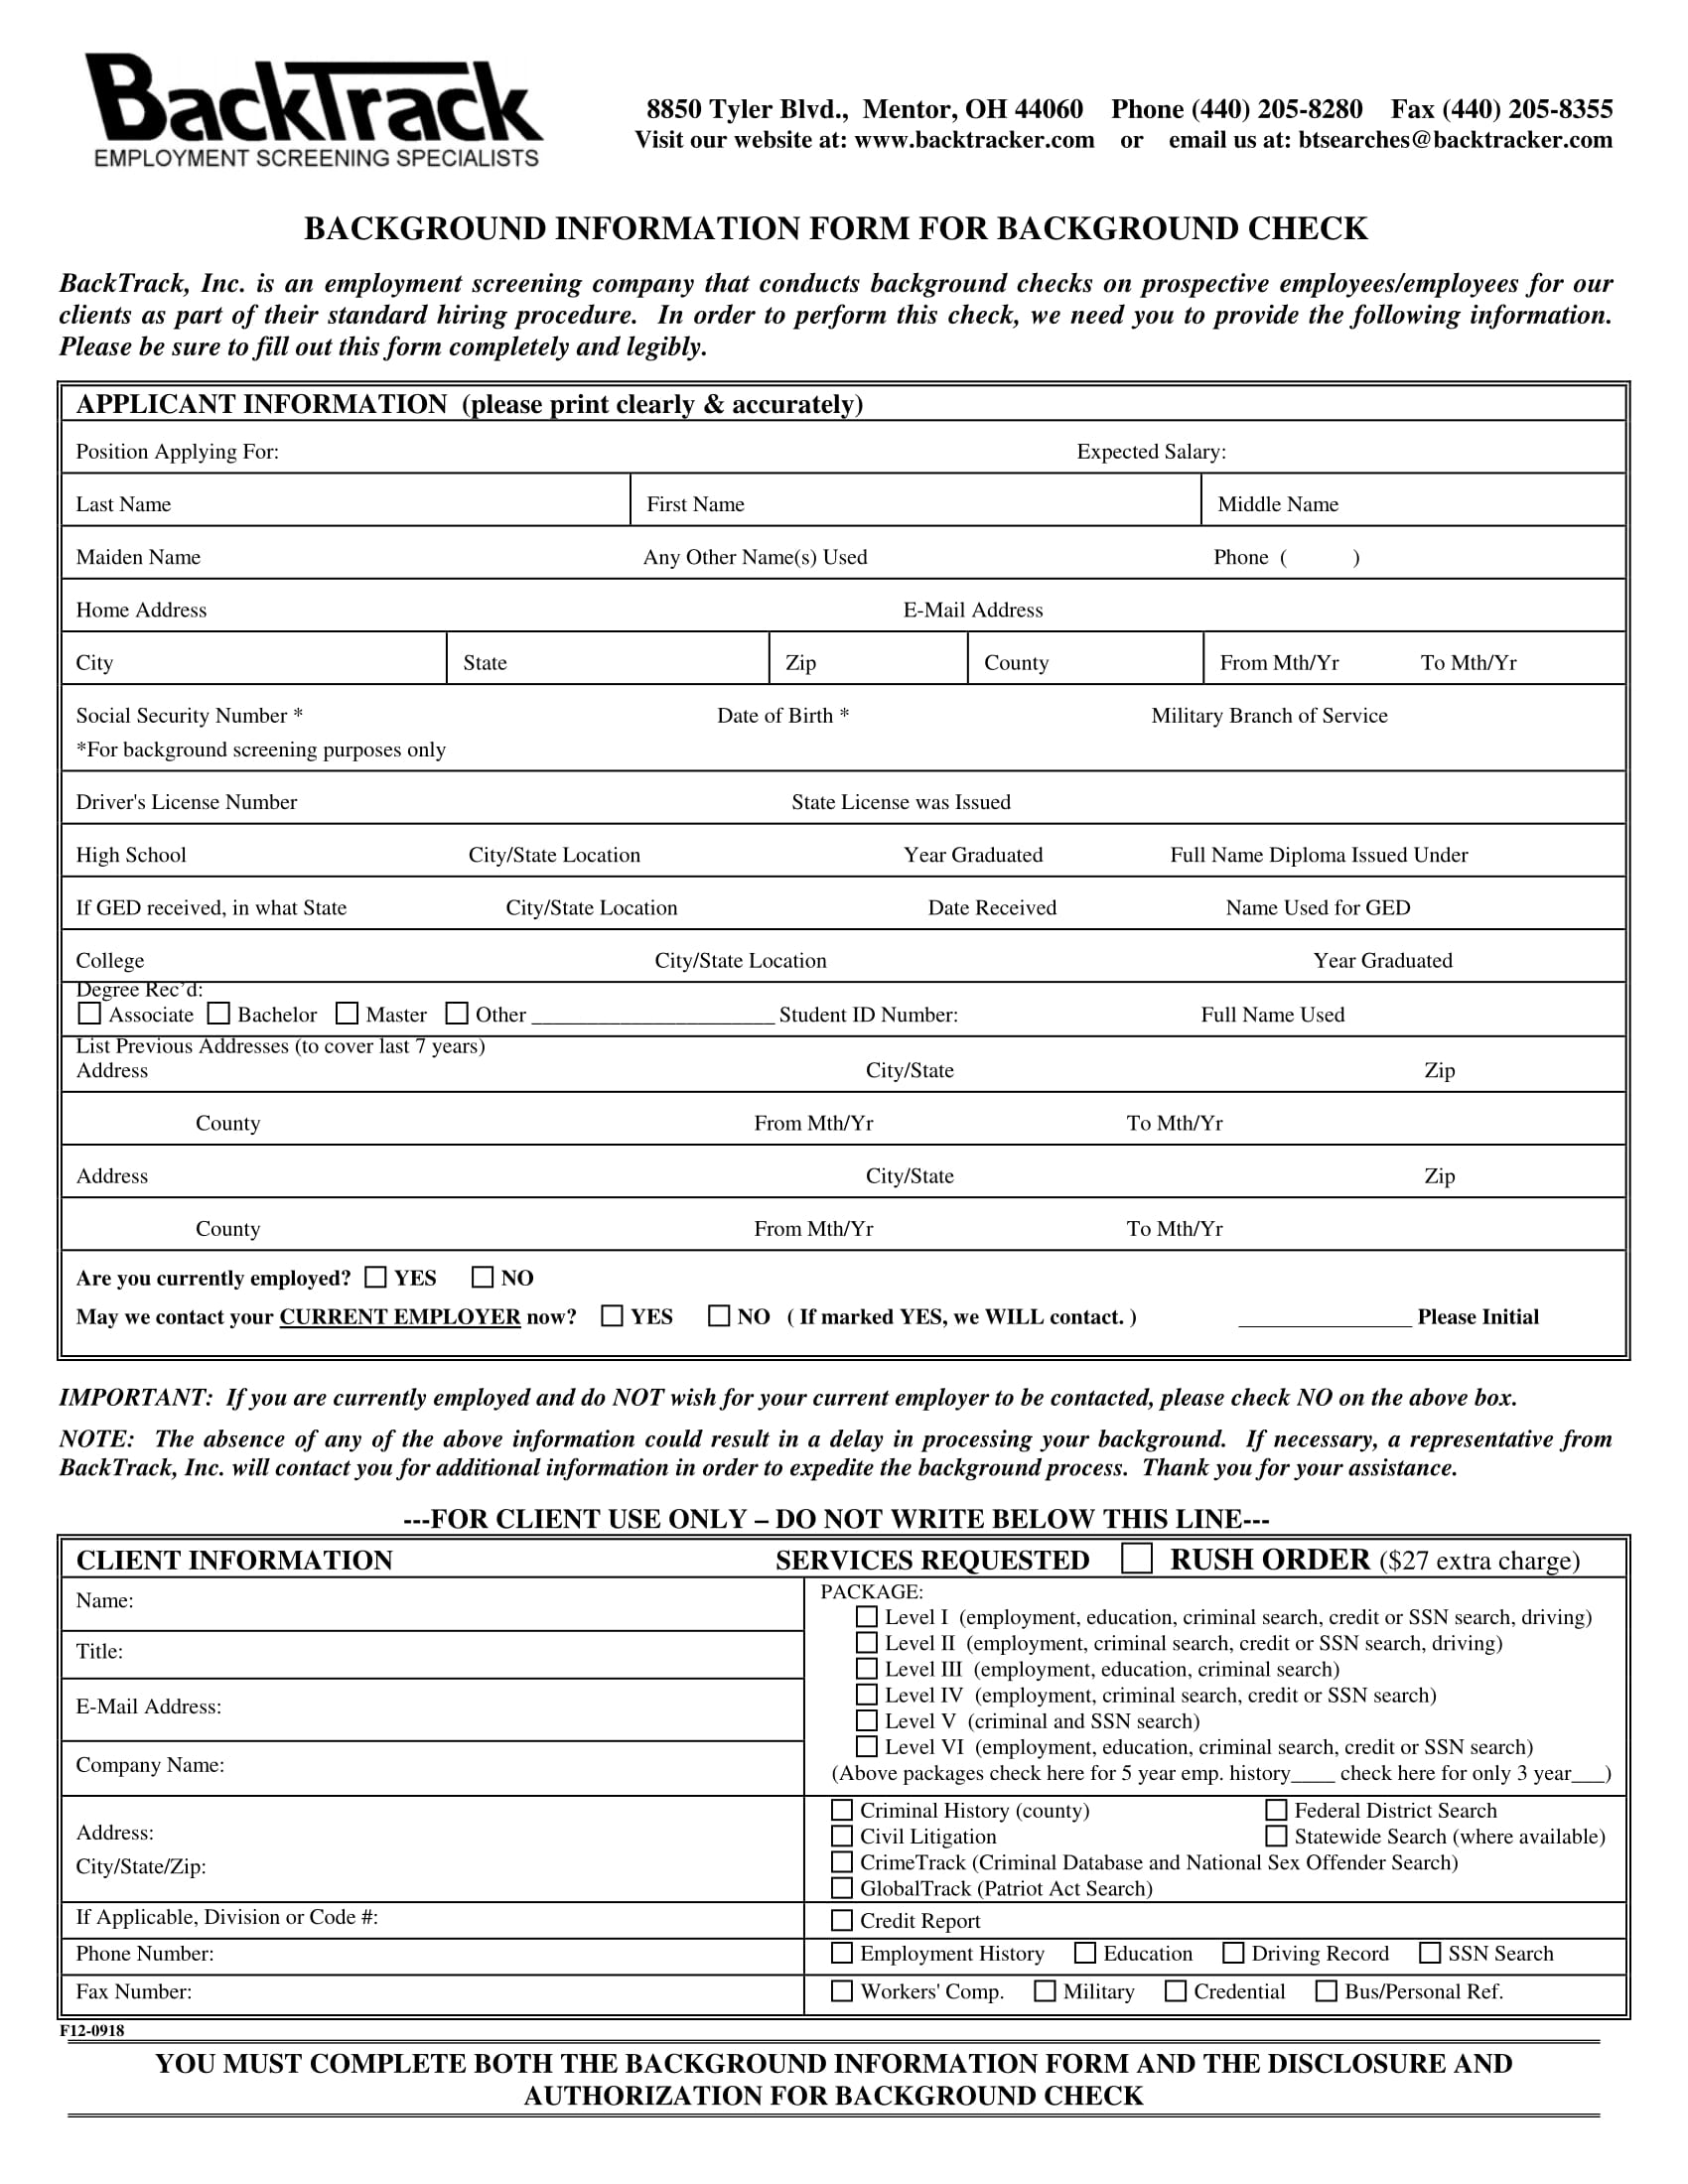 Background Check Consent Form For Candidates For Public Office Anciens Et Reunions